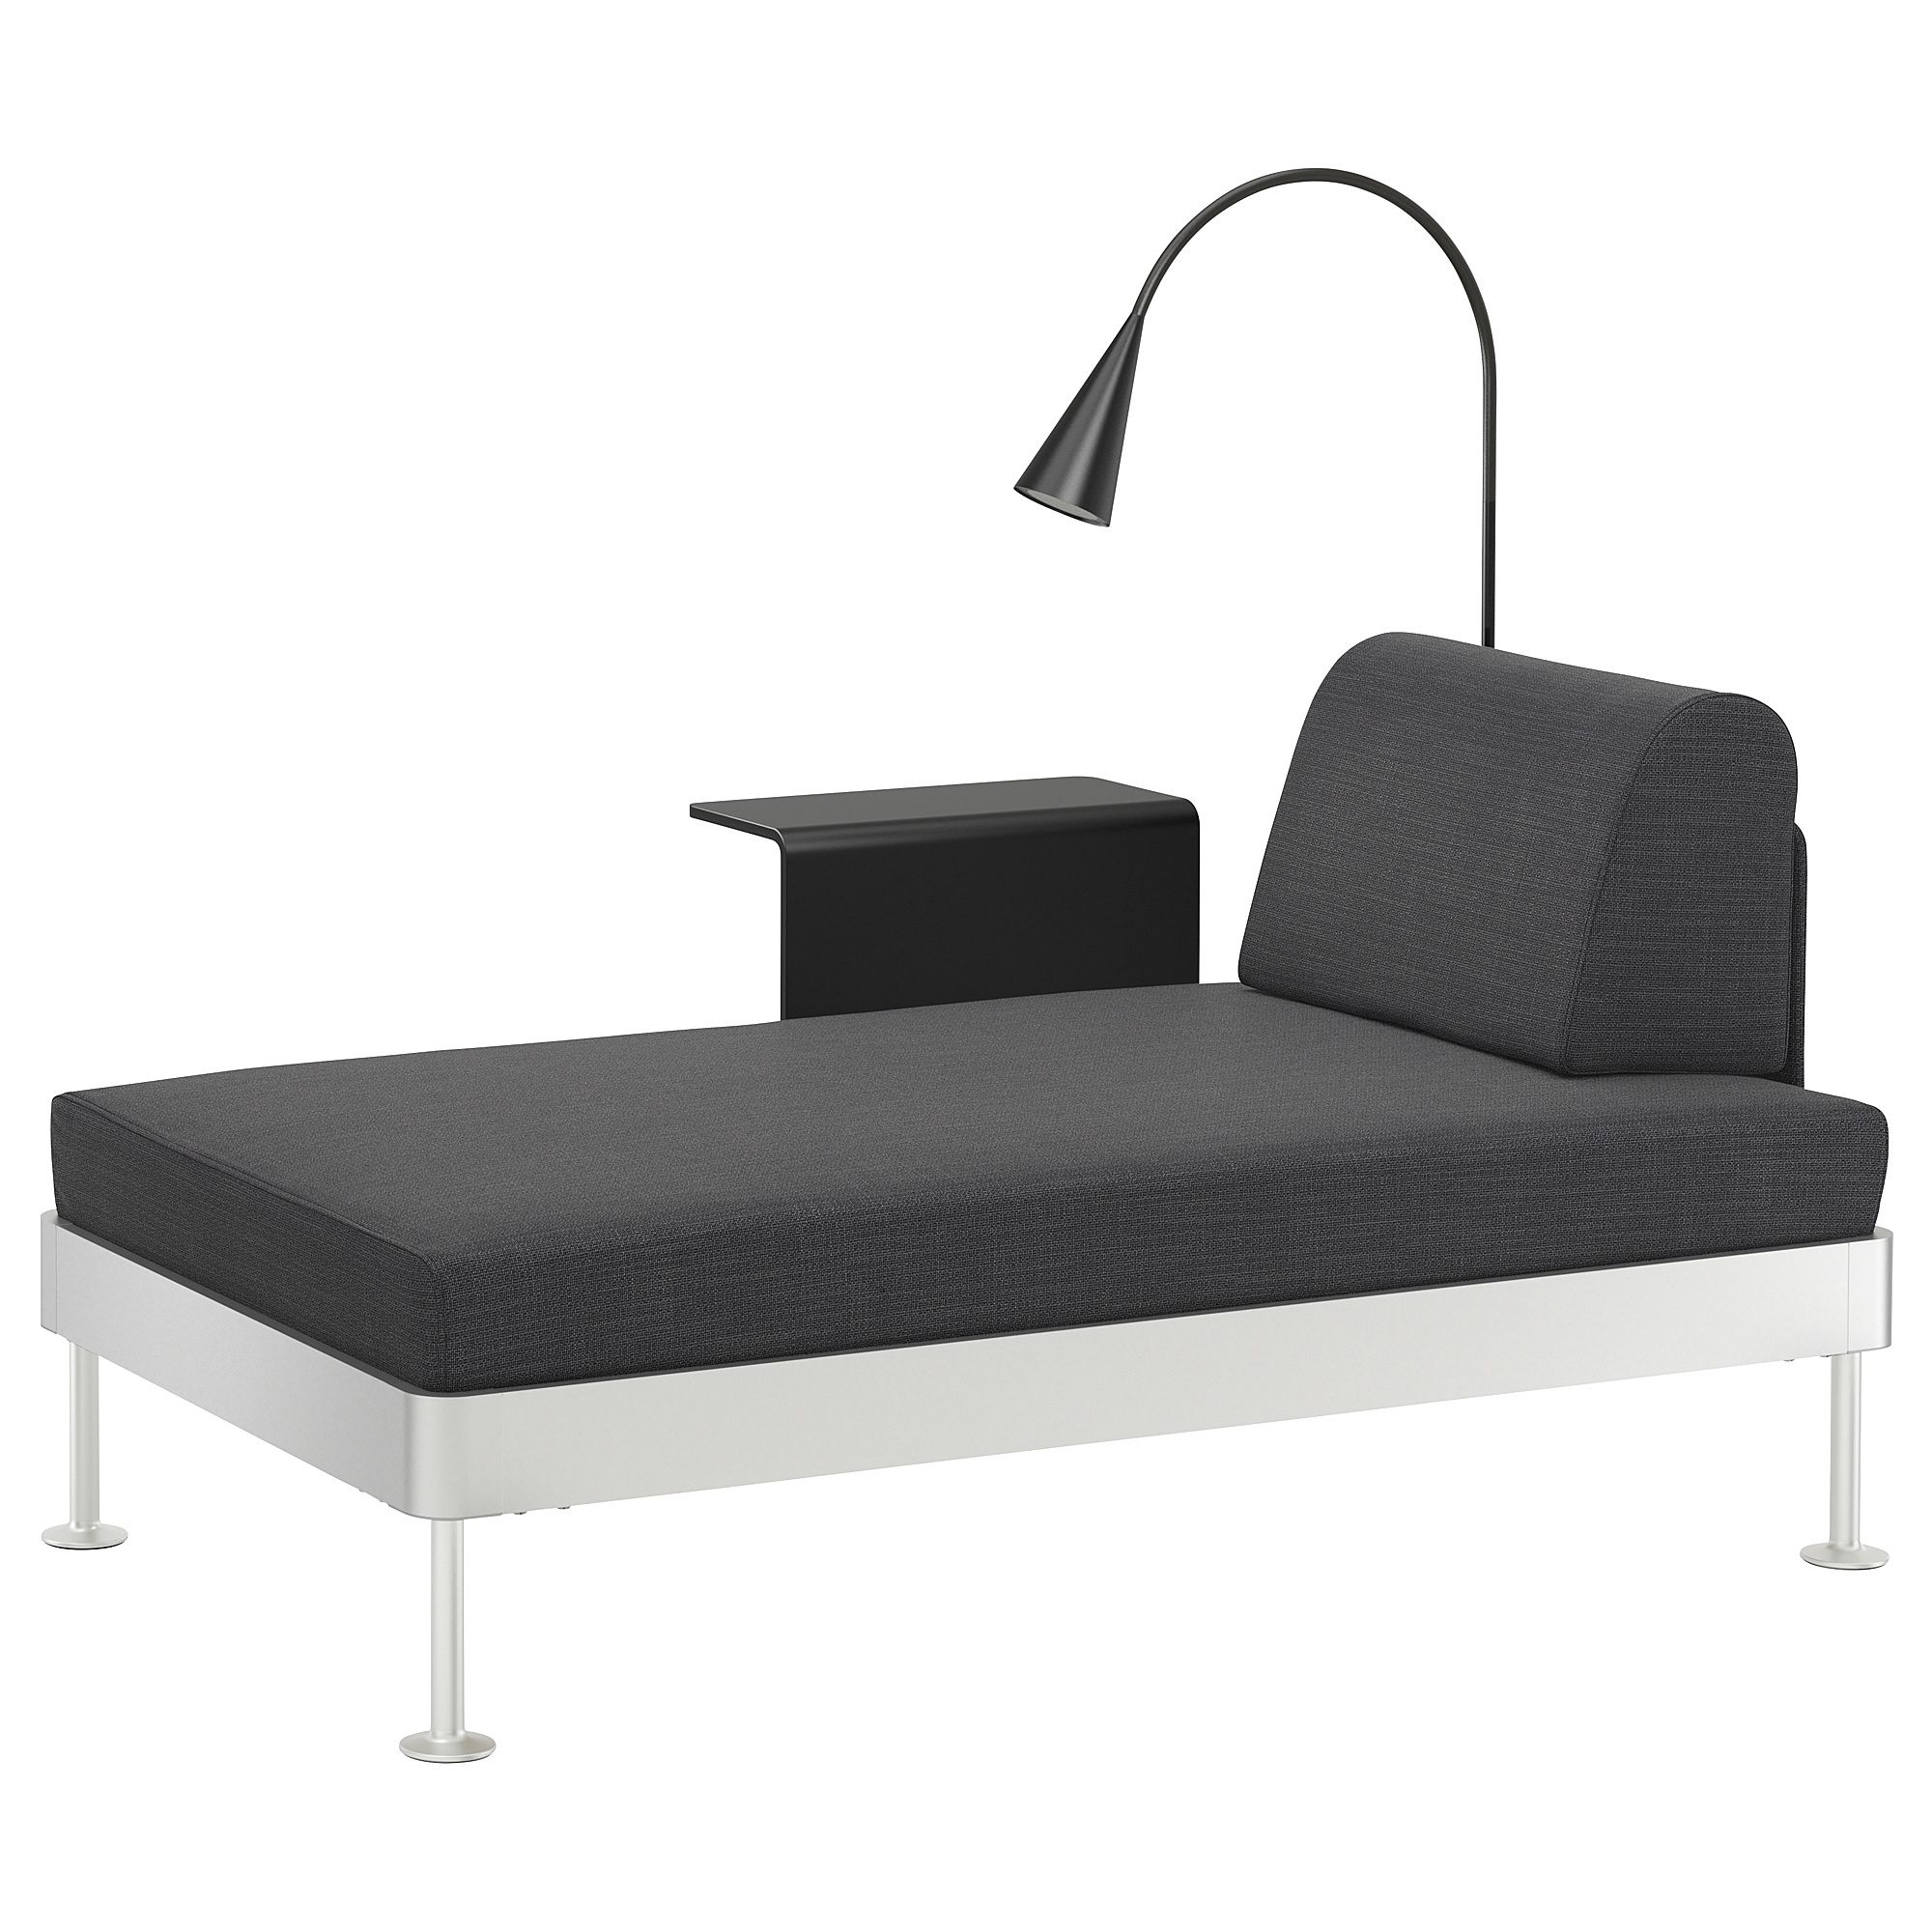 Best And Newest Ikea Chaise Longues Inside Delaktig Chaise Longue W Side Table And Lamp Hillared Anthracite (View 7 of 15)